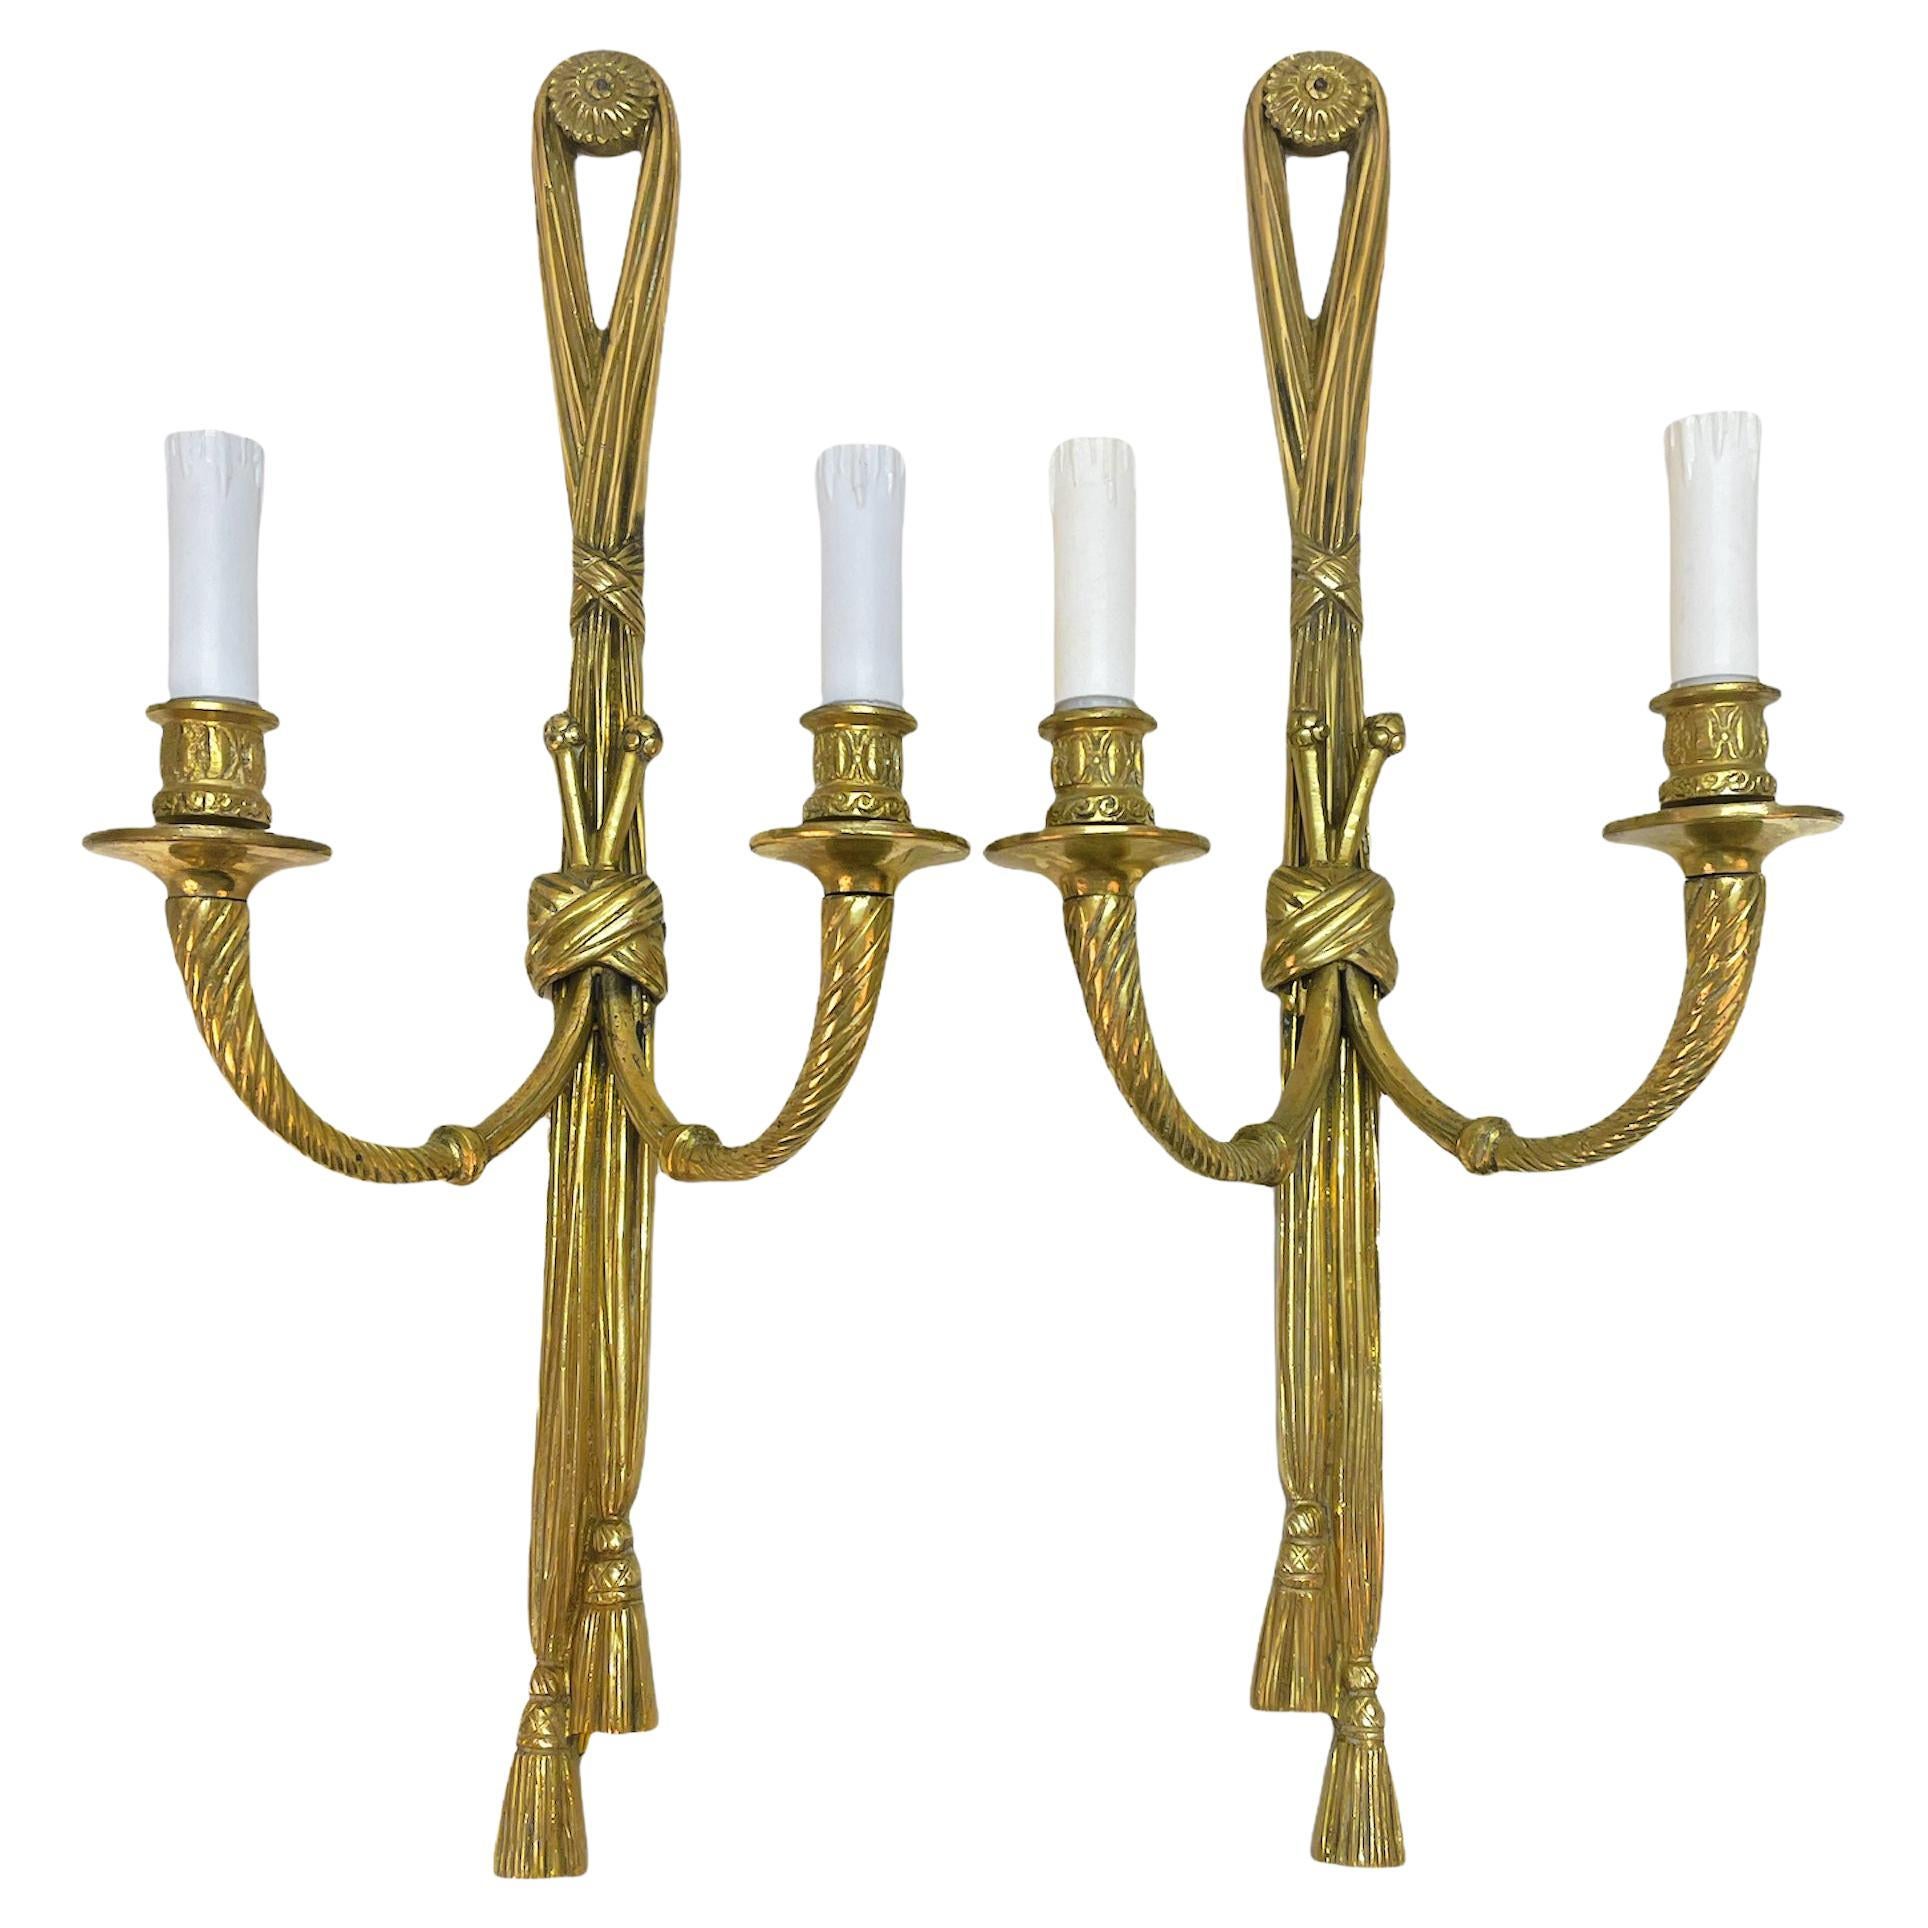 Adjustable Vintage Candle Wall Light Antique Brass M0015W 